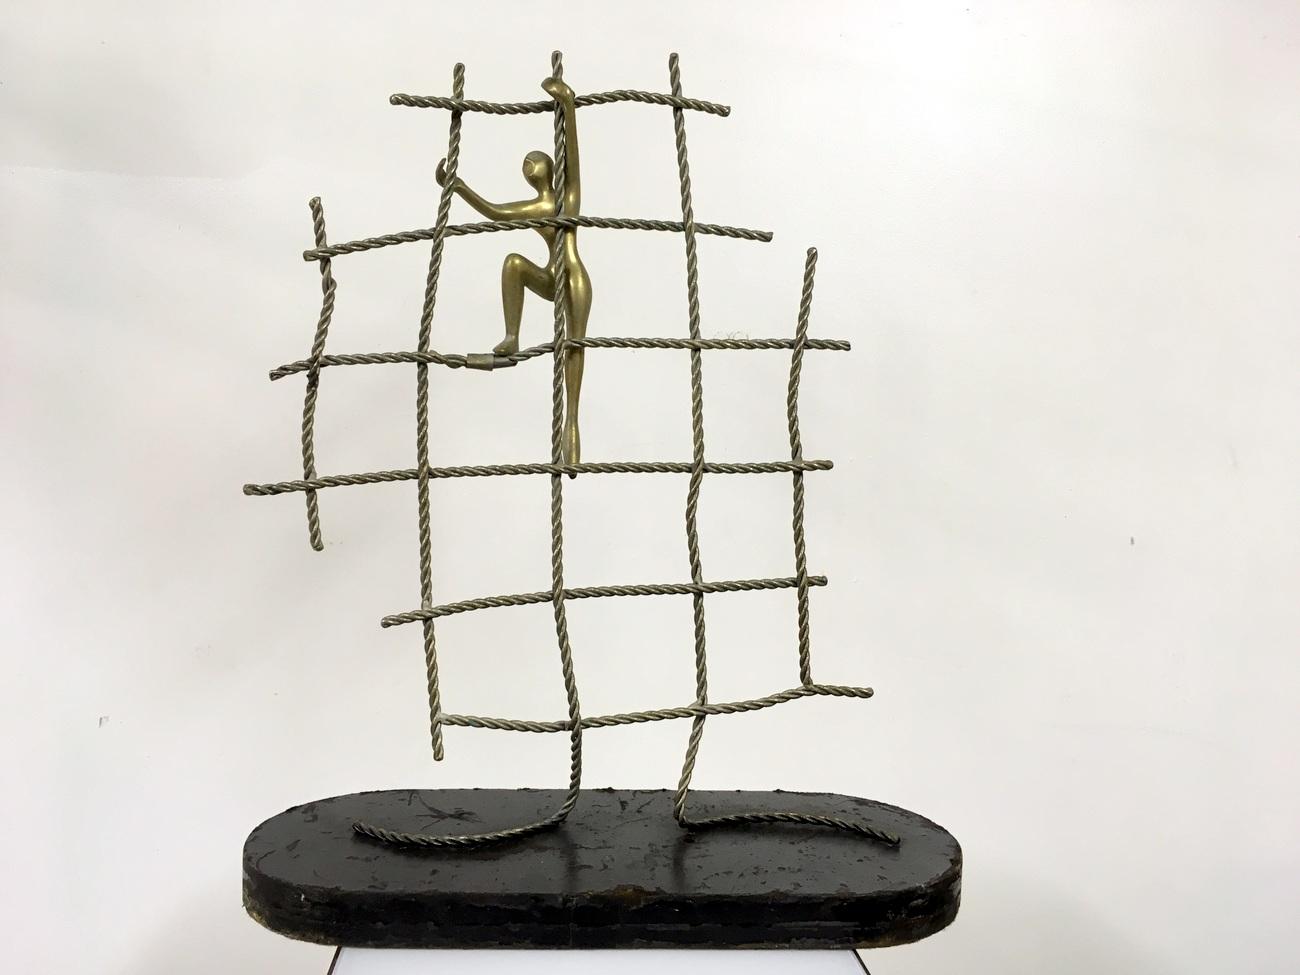 Abstract figure climbing up a net. 

Brass and nickel on black painted wooden base

circa 1960s-1970s.